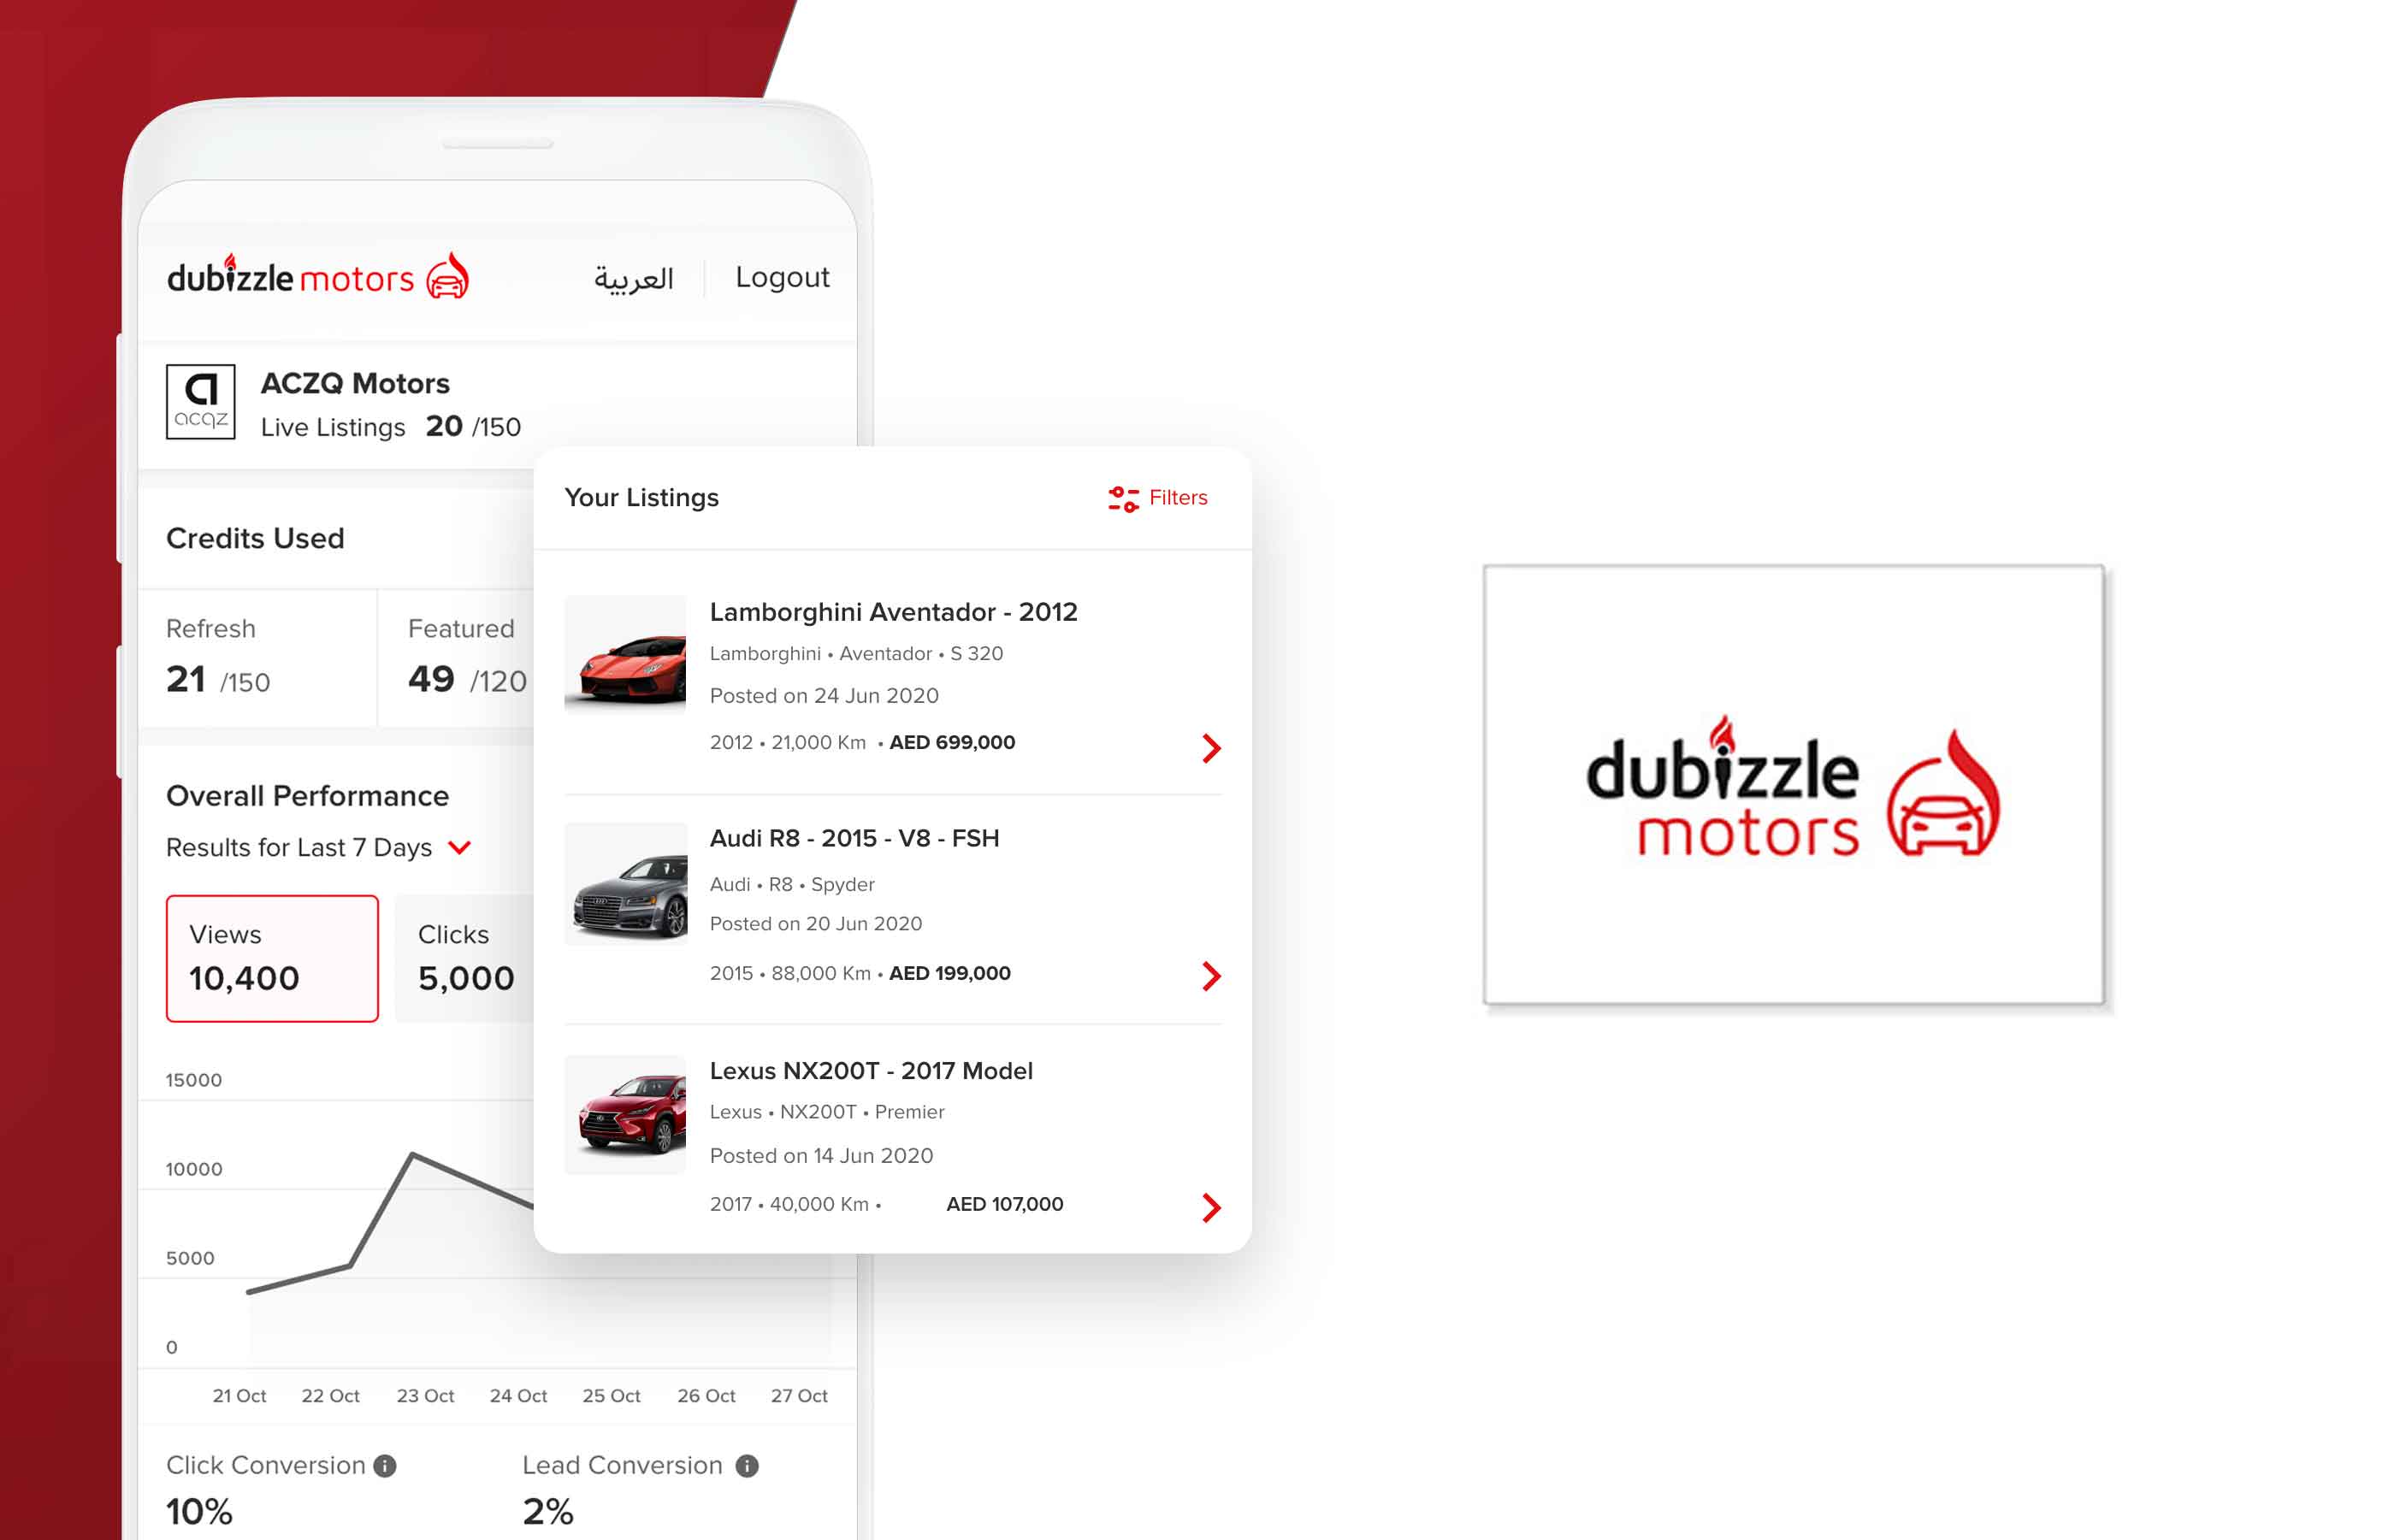 dubizzle launches a new, dedicated app for UAE car dealers